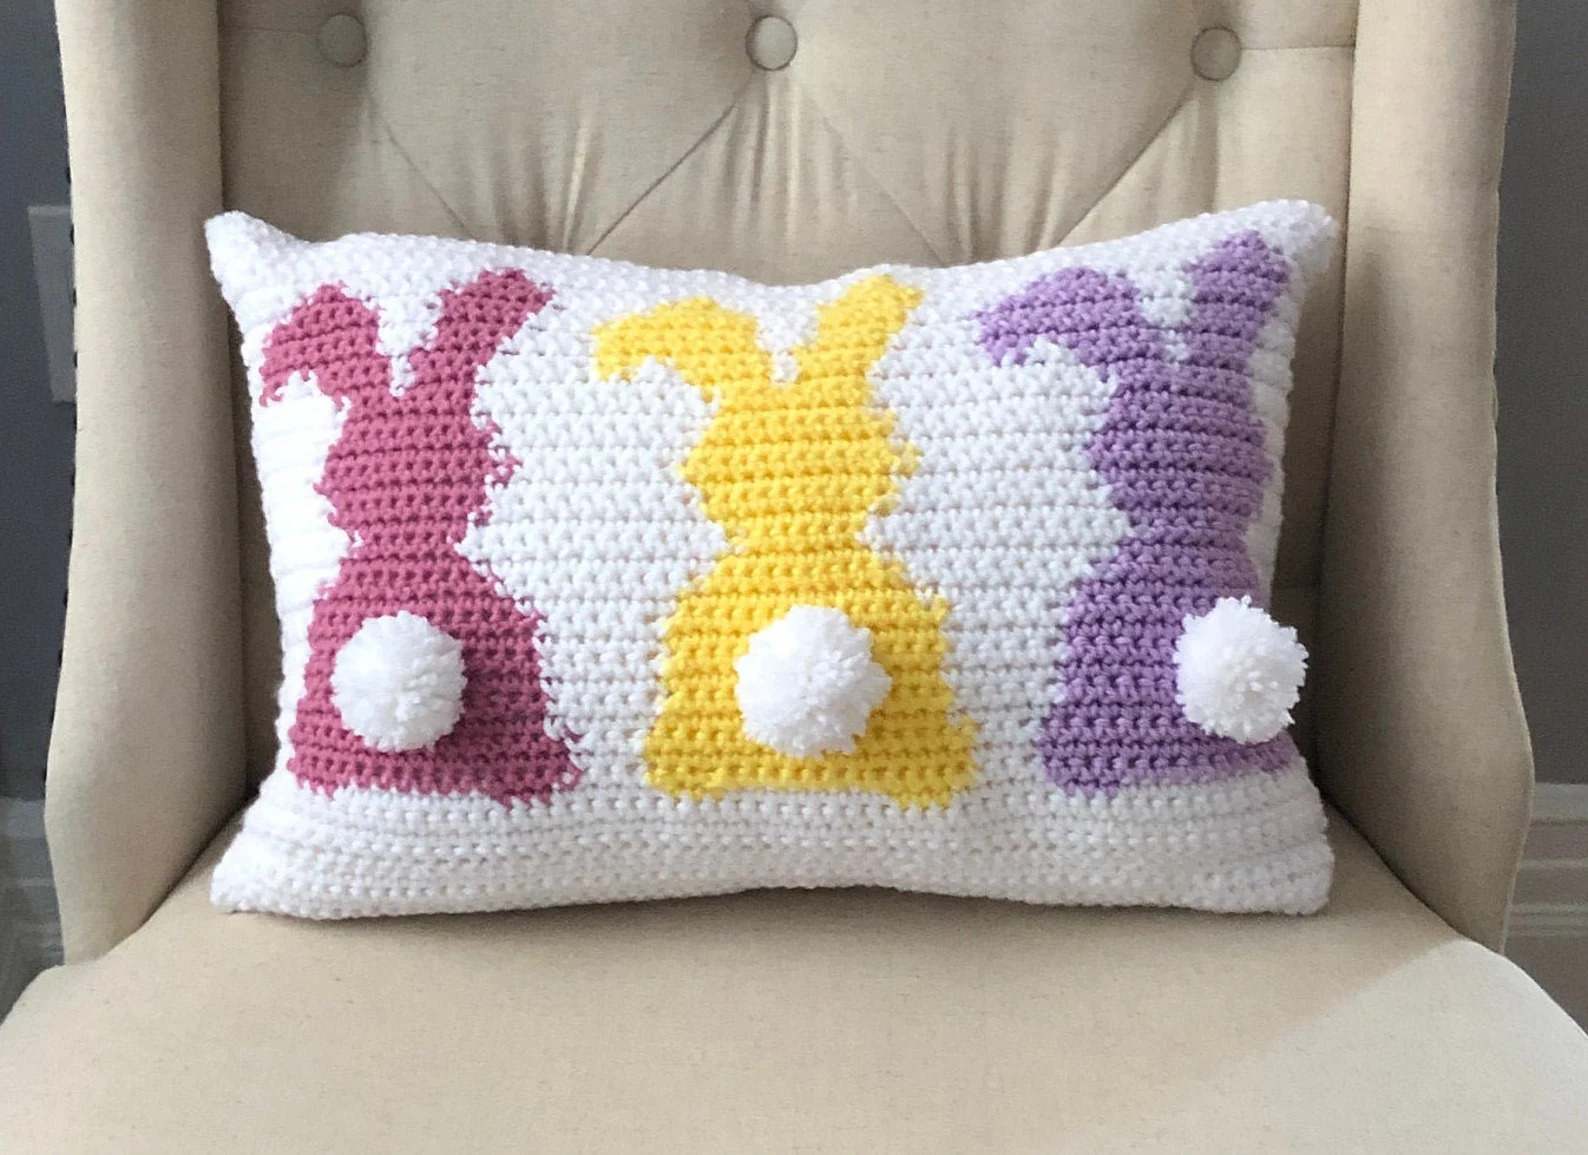 15 Egg-cellent Easter Pillow Designs to Welcome the Festive Season